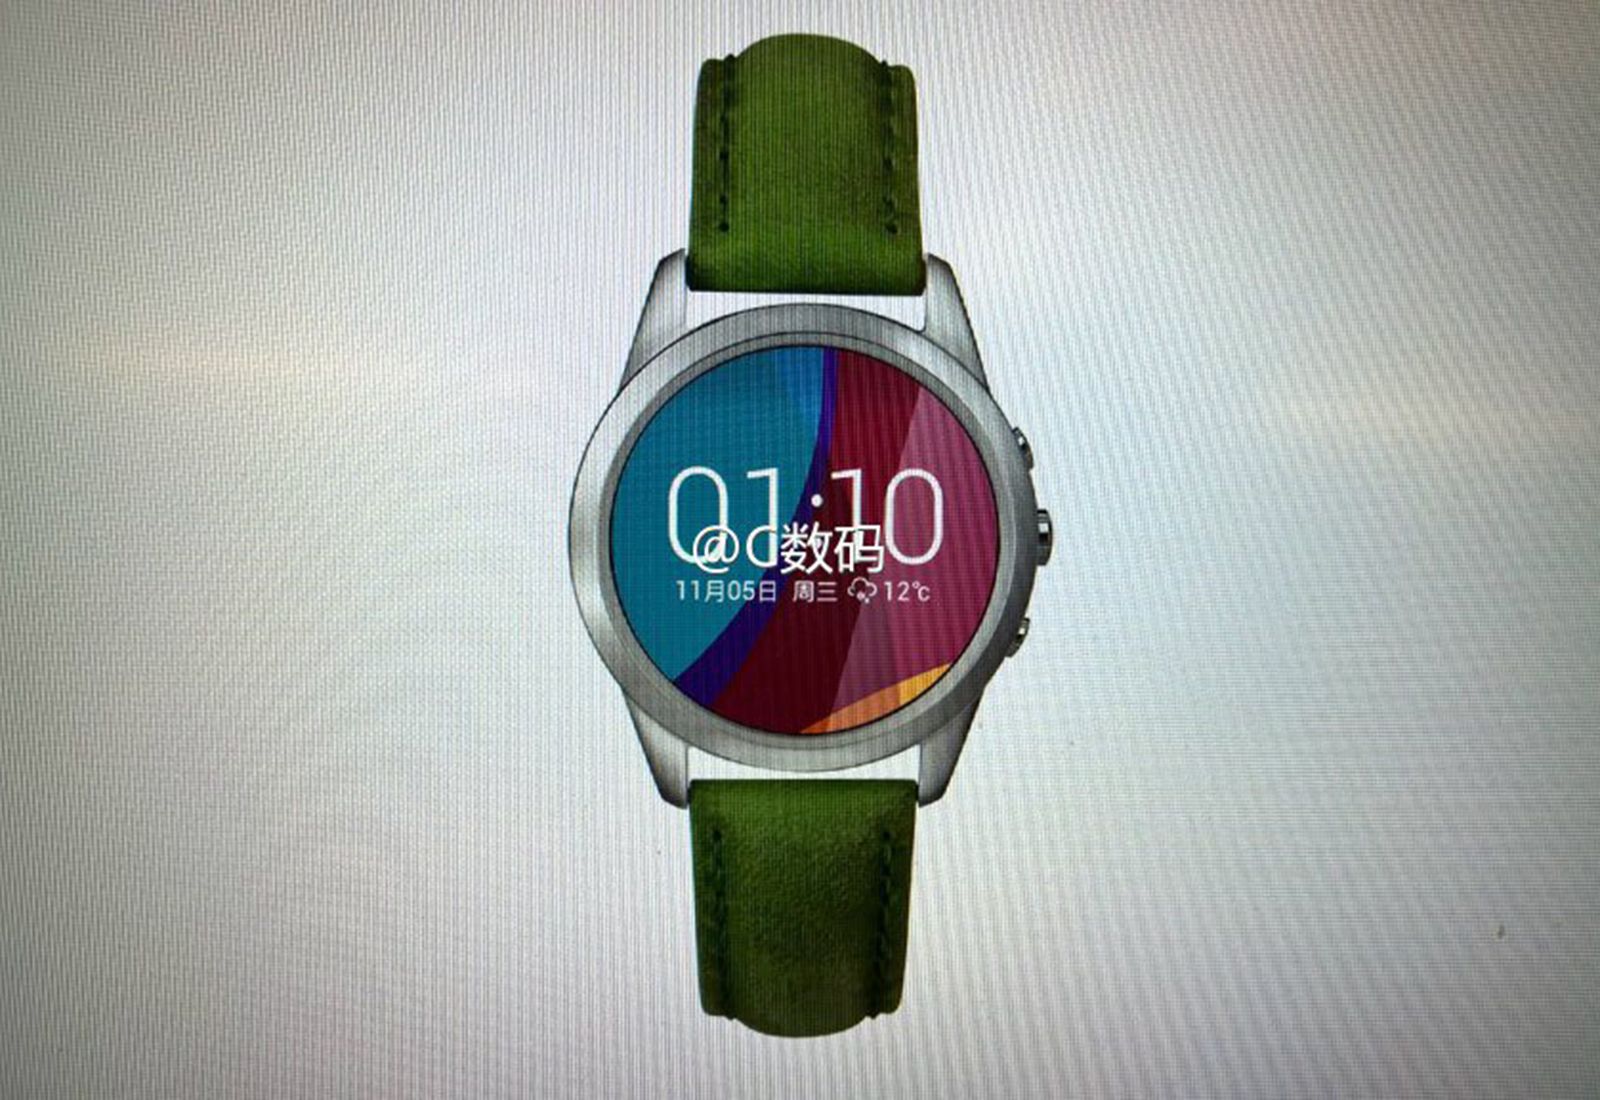 forget apple watch oppo smartwatch is reported to fully charge in just five minutes image 1